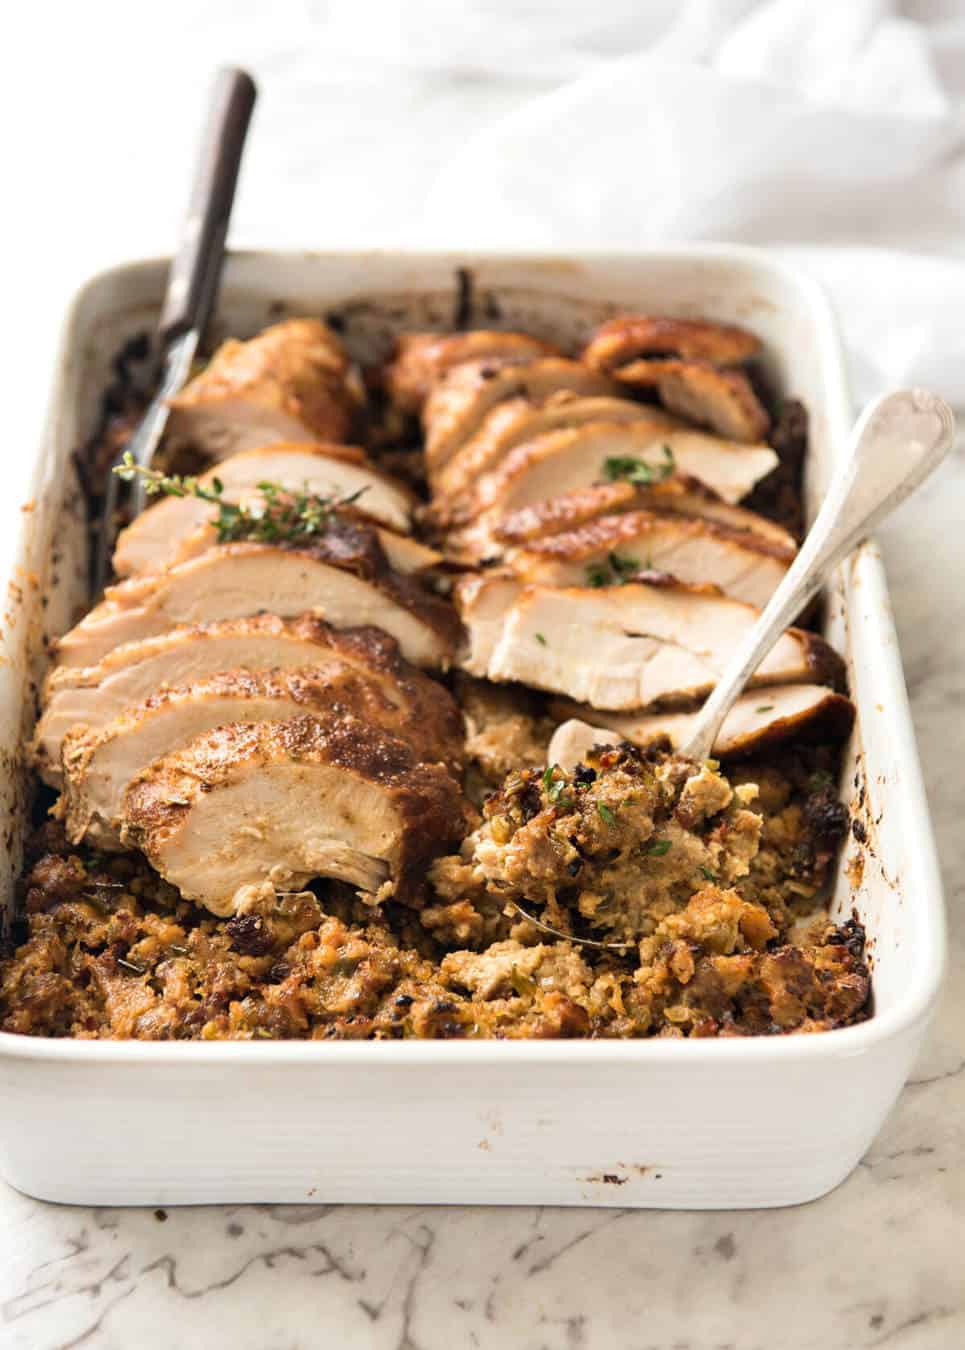 This Cajun dry brined turkey breast is baked in the same roasting pan as the Dressing / Stuffing so it's extra juicy and moist! A chef recipe, this Cajun Baked Turkey Breast with Dressing is easy and spectacular. EPIC ONE PAN COOKING for a Thanksgiving turkey! www.recipetineats.com